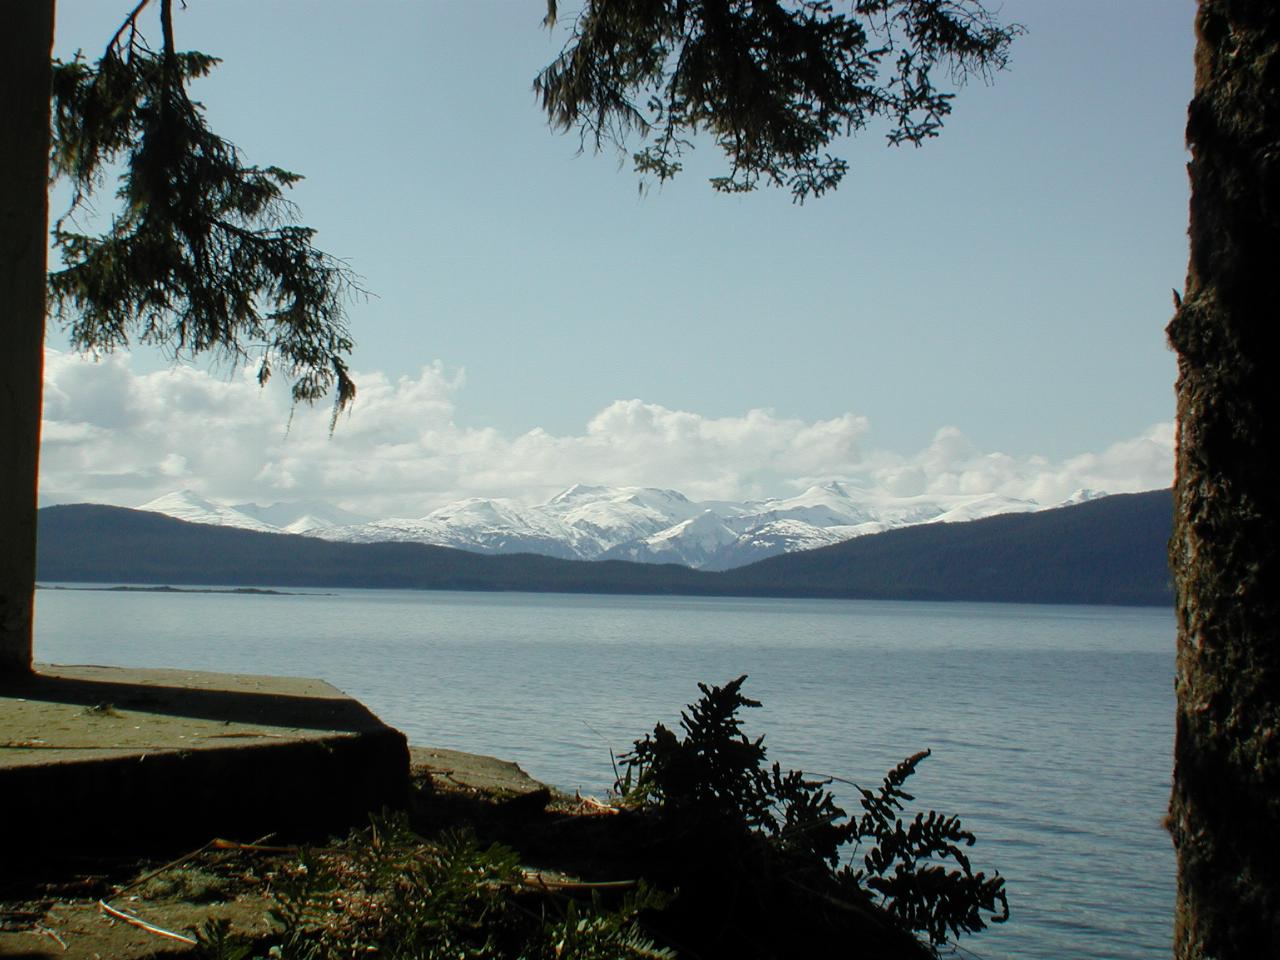 View across Gastineau Channel from Shrine of St. Terese from base of Cross with Easter Lilies in bloom on Easter Sunday